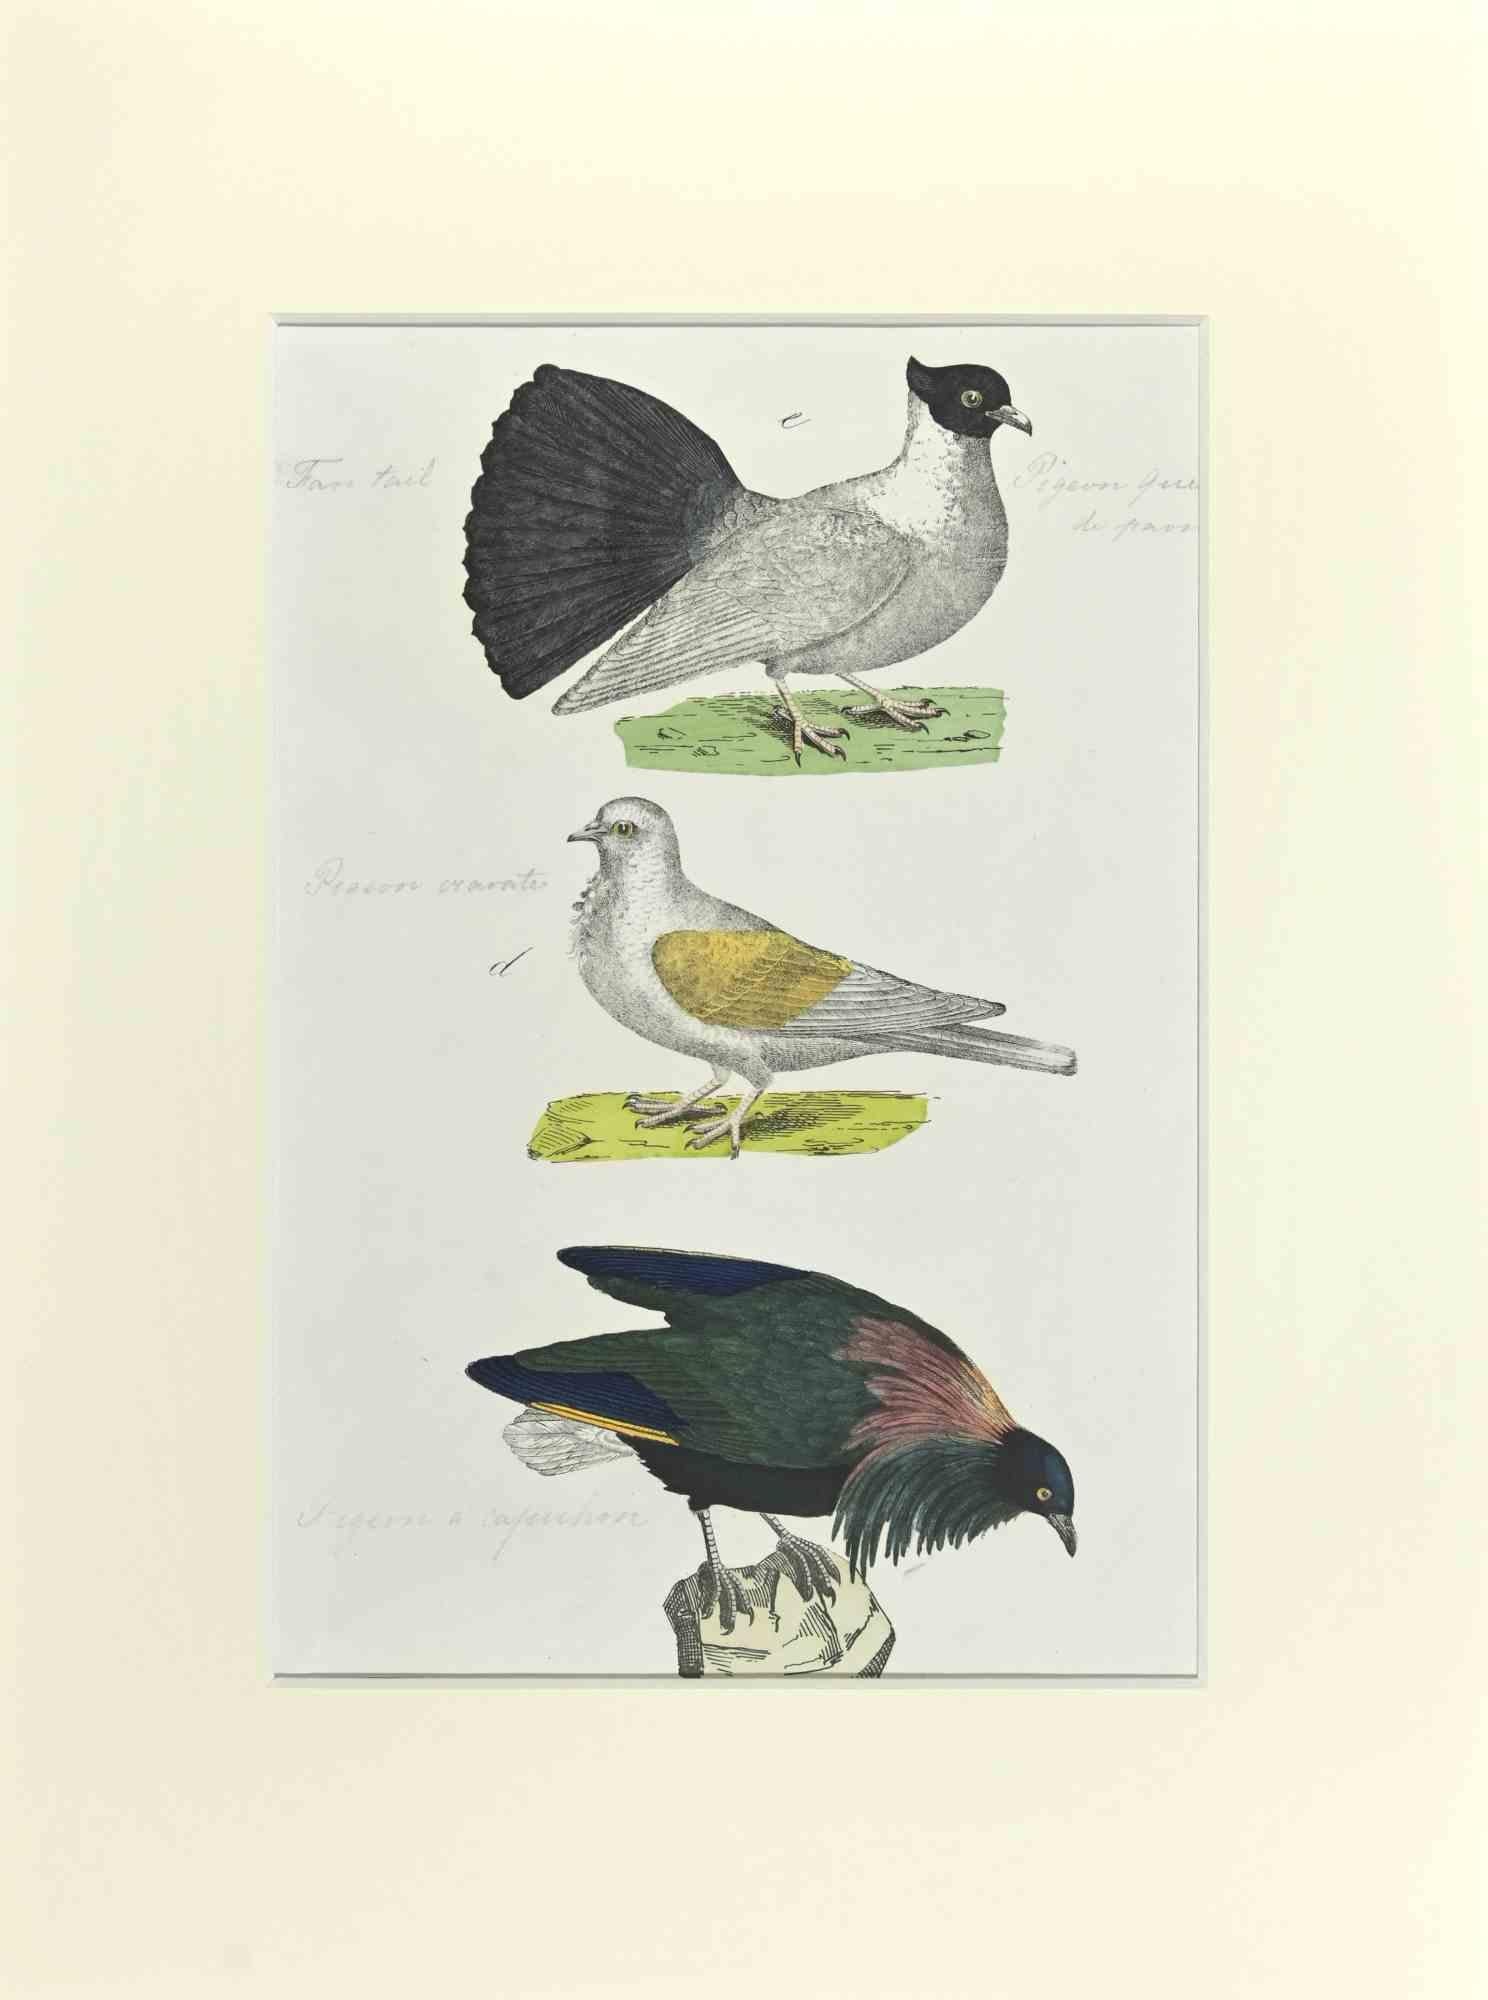 Pigeon With Fan Tail is an Etching hand colored realized by Gotthilf Heinrich von Schubert - Johann Friedrich Naumann, Illustration from Natural history of birds in pictures, published by Stuttgart and Esslingen, Schreiber and Schill 1840 ca.